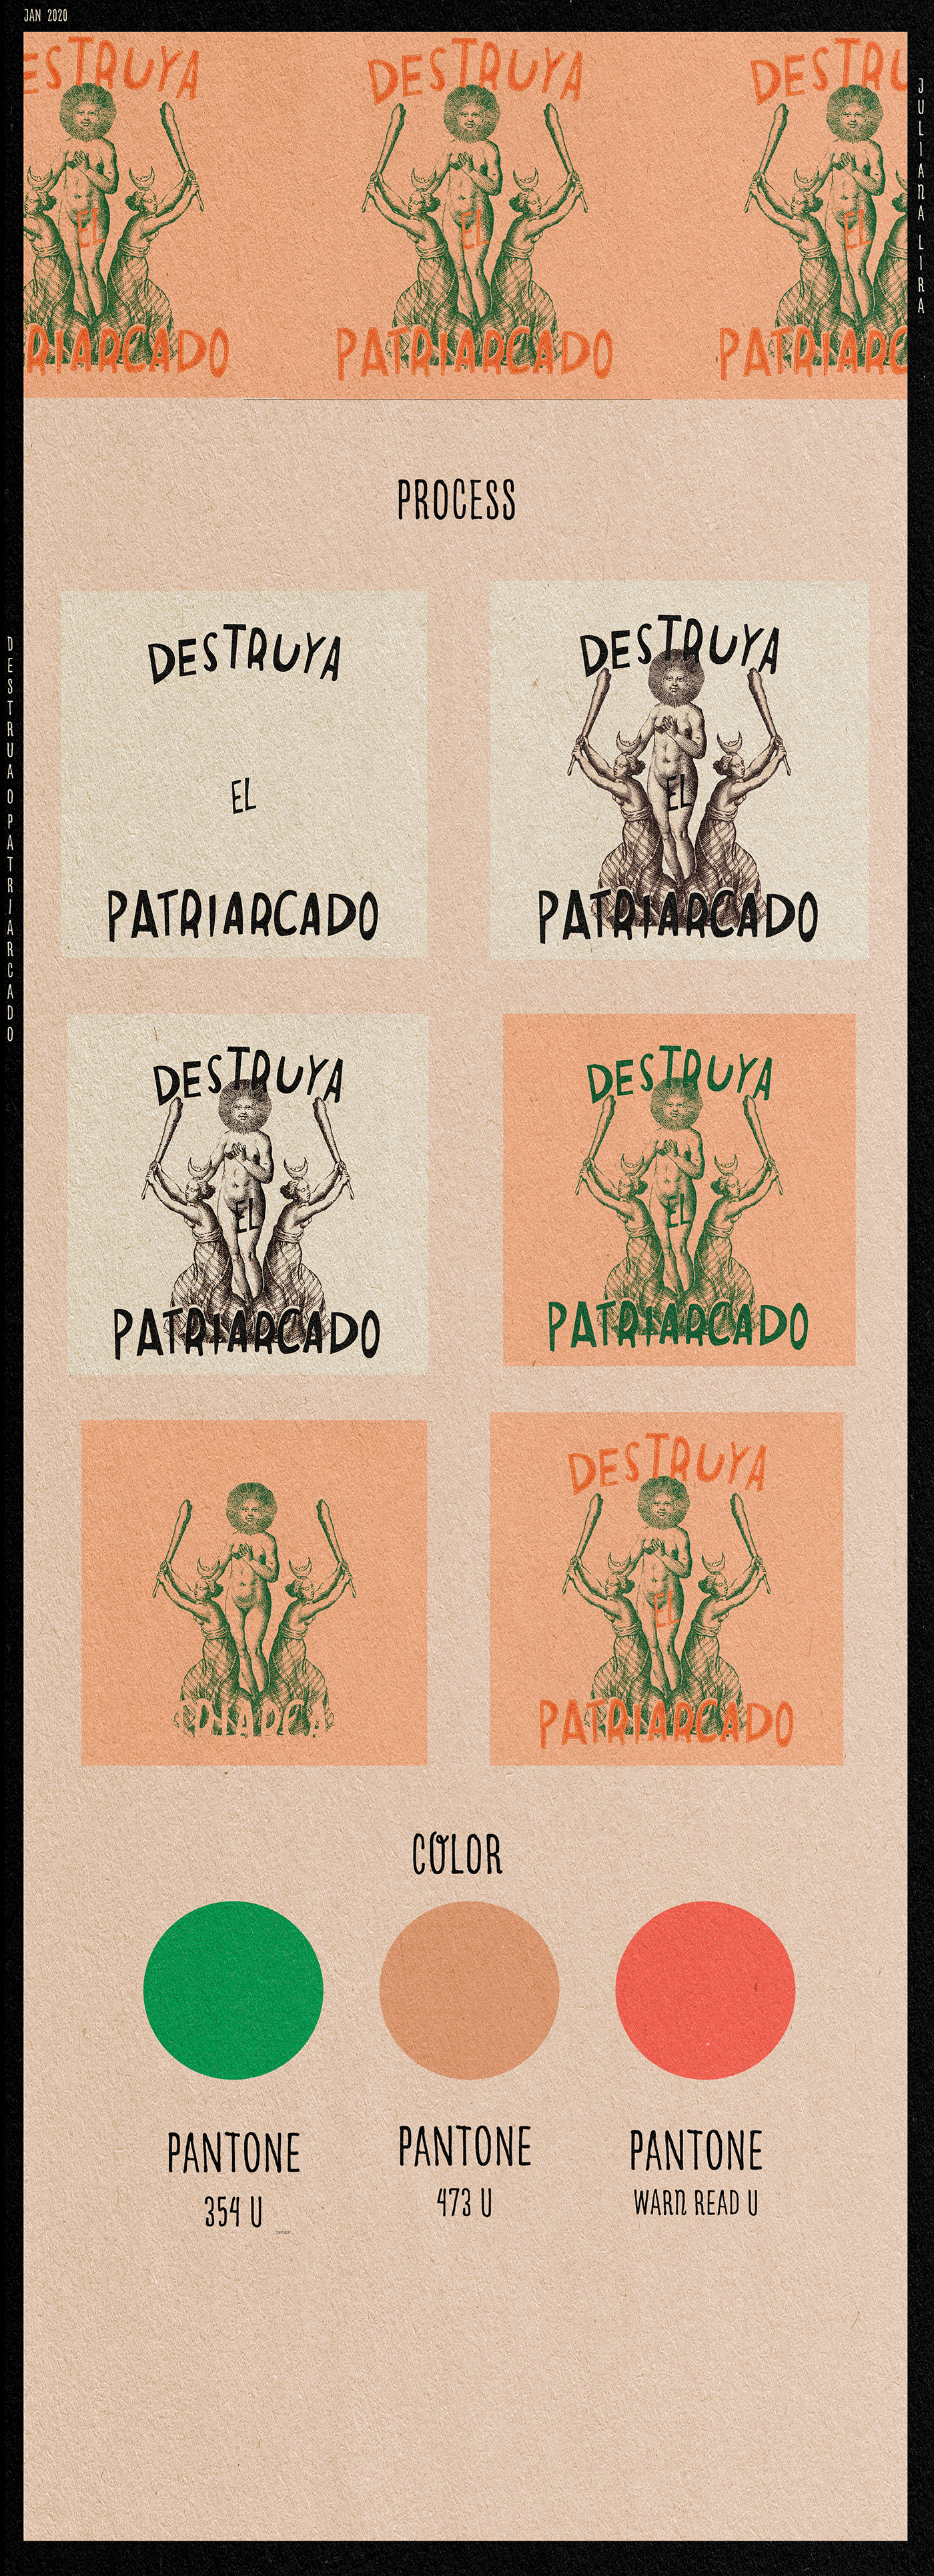 feminism patriarchy destroy patriarchy witch old illustration old print effect duotono paper effect old graphic design